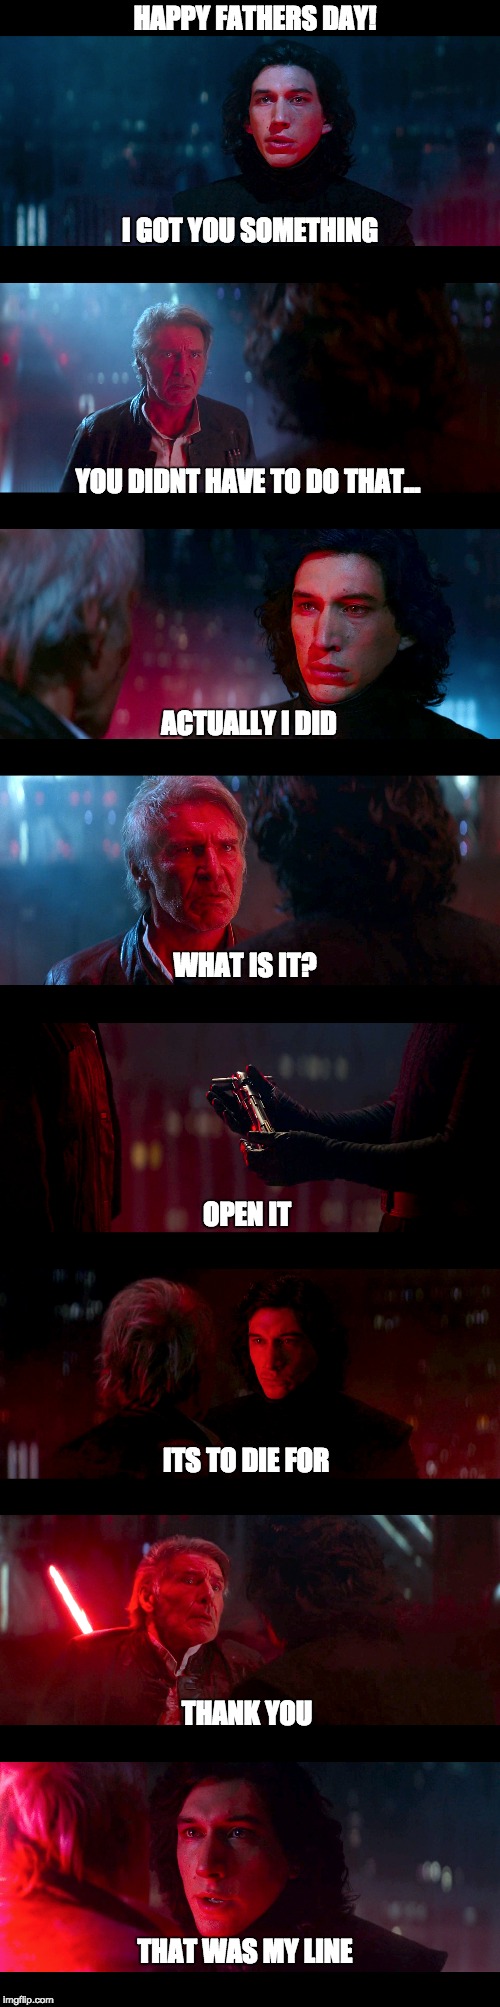 Happy Fathers Day | HAPPY FATHERS DAY! I GOT YOU SOMETHING; YOU DIDNT HAVE TO DO THAT... ACTUALLY I DID; WHAT IS IT? OPEN IT; ITS TO DIE FOR; THANK YOU; THAT WAS MY LINE | image tagged in starwars,star,wars,fathersday,kyloren,hansolo | made w/ Imgflip meme maker